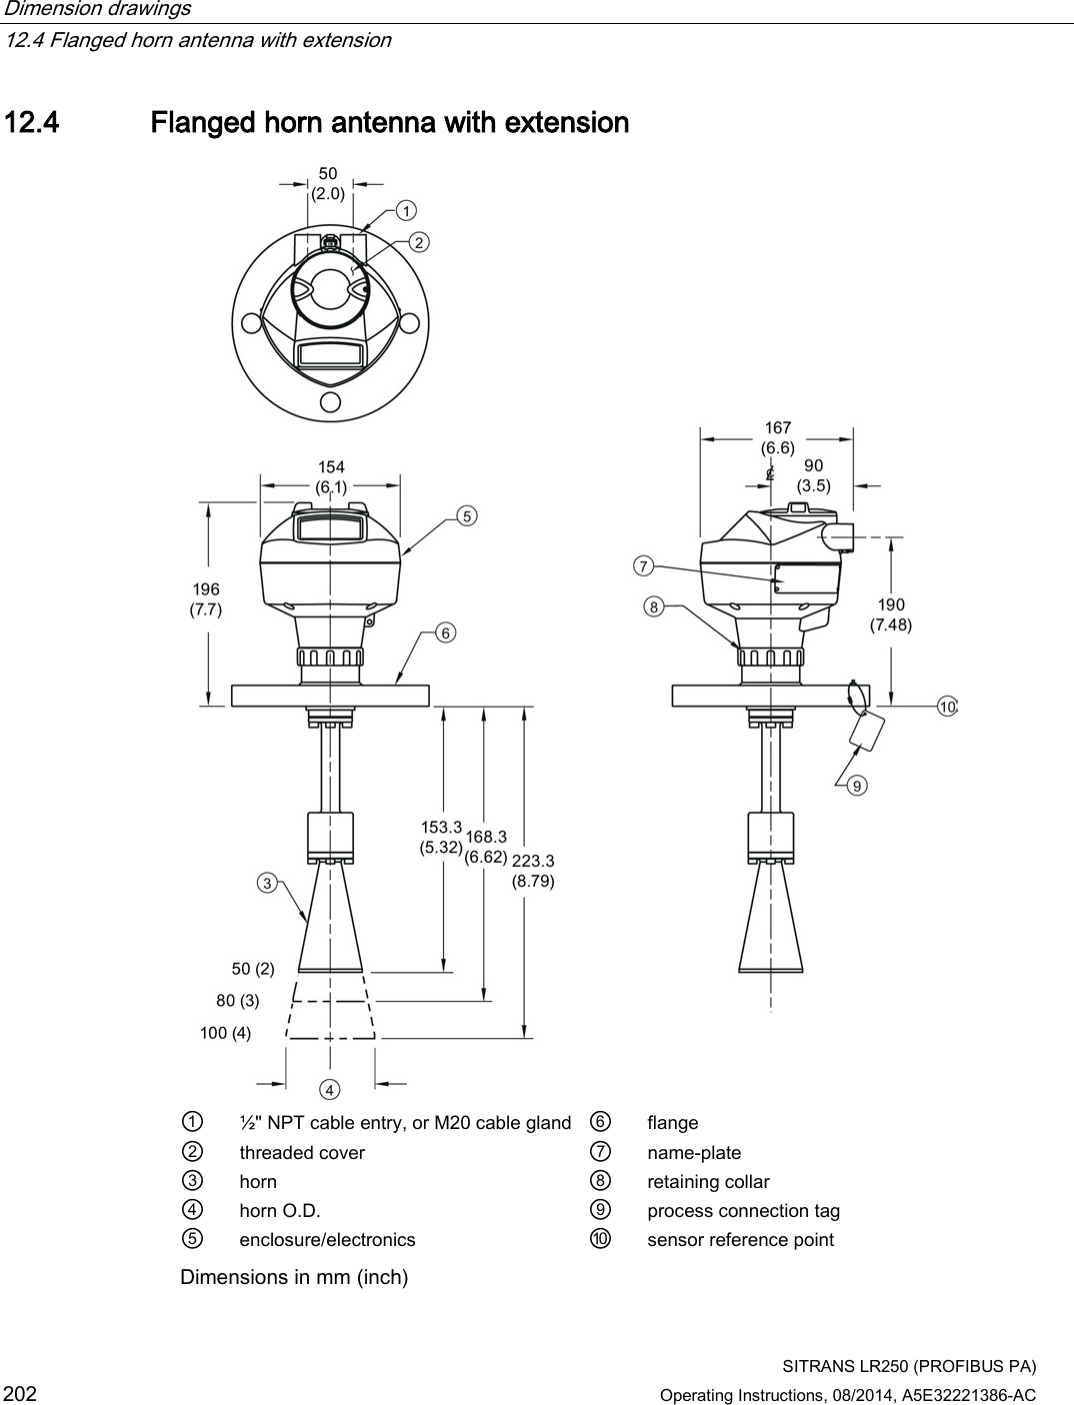 Dimension drawings   12.4 Flanged horn antenna with extension  SITRANS LR250 (PROFIBUS PA) 202 Operating Instructions, 08/2014, A5E32221386-AC 12.4 Flanged horn antenna with extension  ① ½&quot; NPT cable entry, or M20 cable gland ⑥ flange ② threaded cover ⑦ name-plate ③ horn ⑧ retaining collar ④ horn O.D. ⑨ process connection tag ⑤ enclosure/electronics ⑩ sensor reference point Dimensions in mm (inch) 